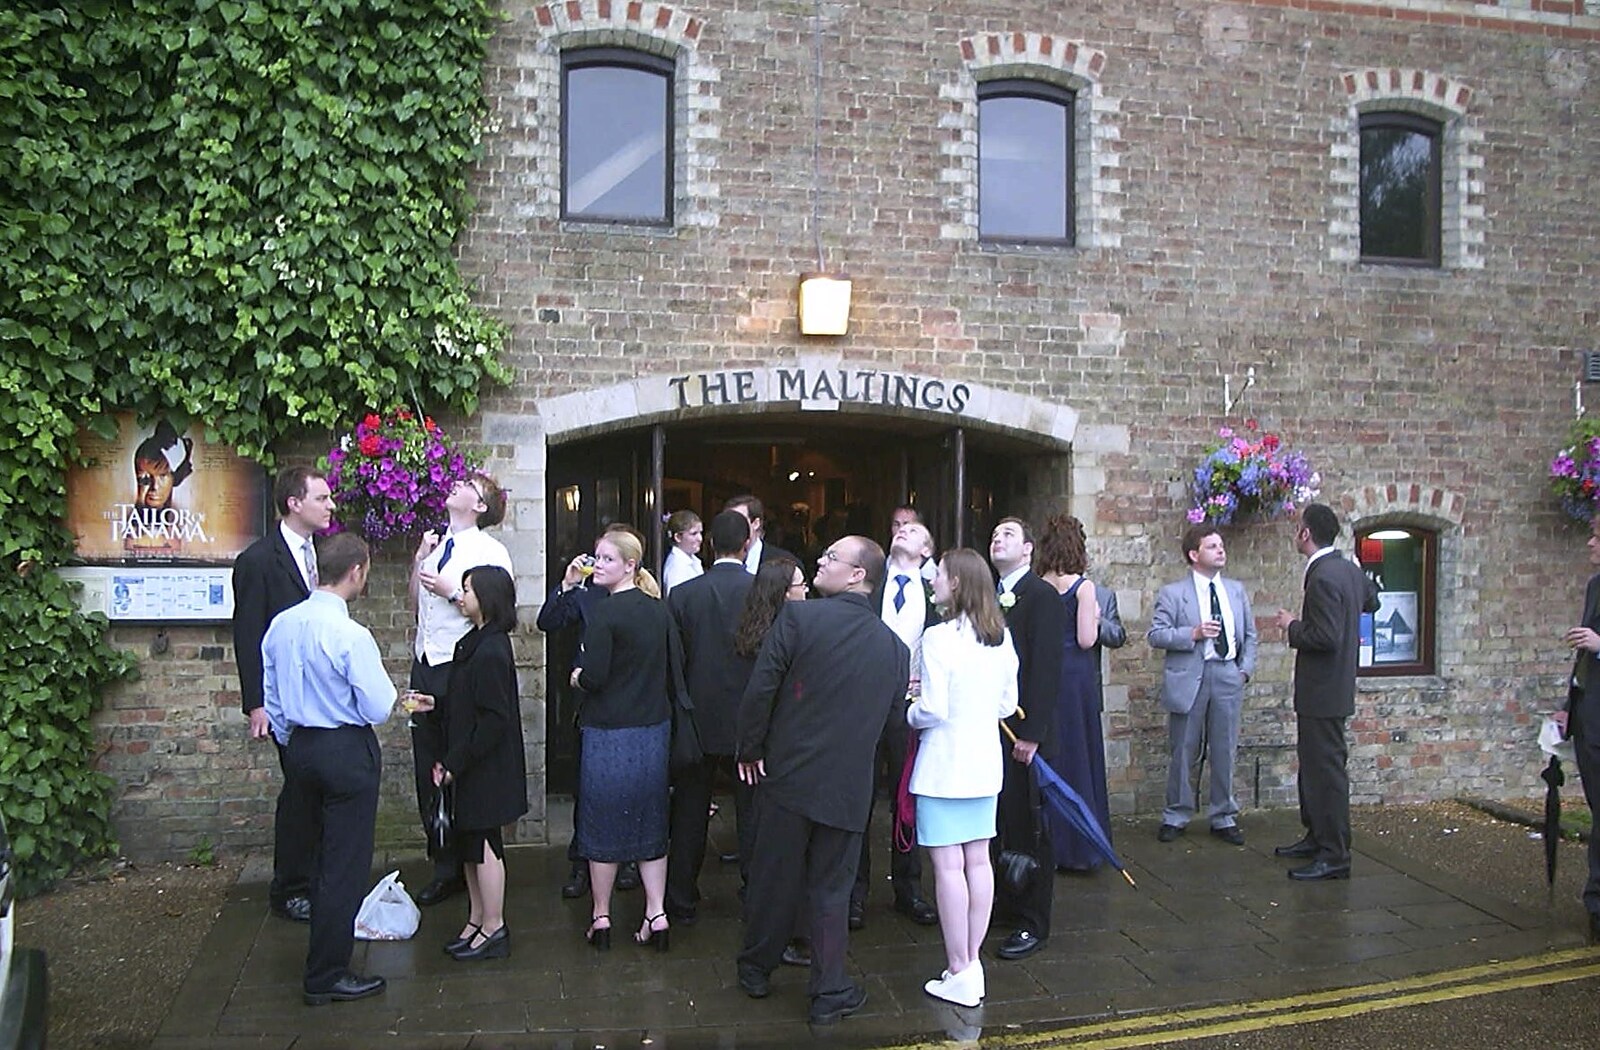 Stef and Kath's 3G Lab Wedding, Ely, Cambridgeshire - 28th July 2001: Guests assemble outside the Maltings